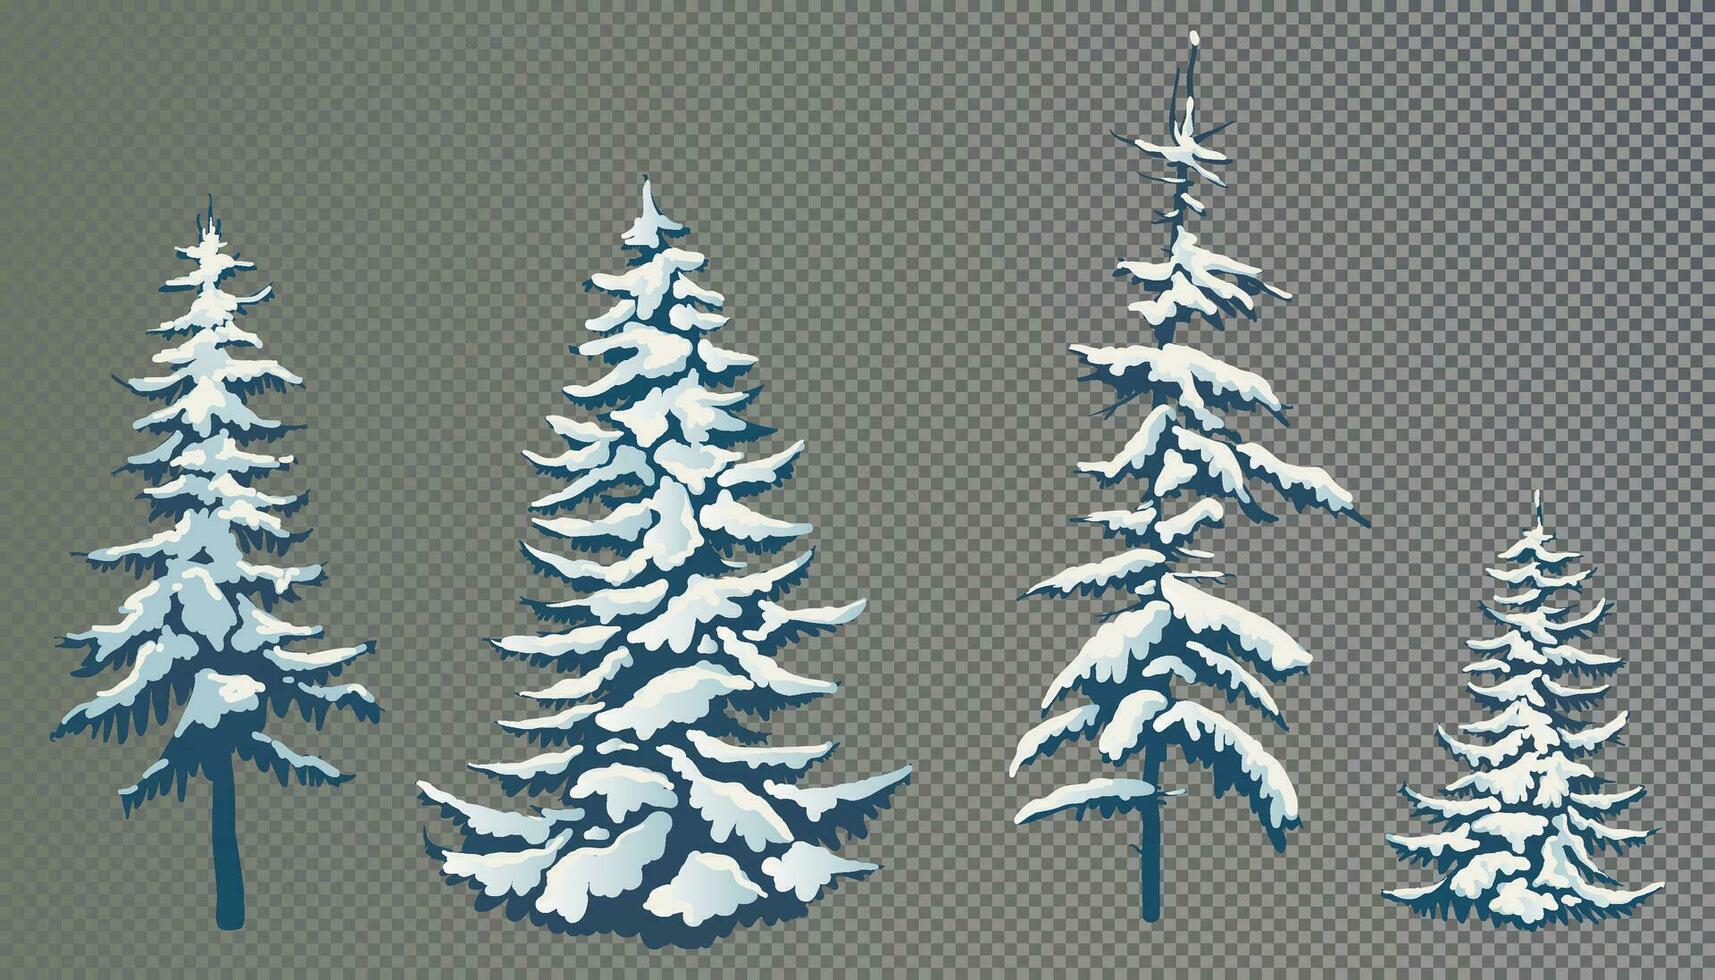 Realistic vector illustration of a spruce tree in the snow. Green fluffy pine. Winter snow-covered trees. Elements for the Christmas scene.